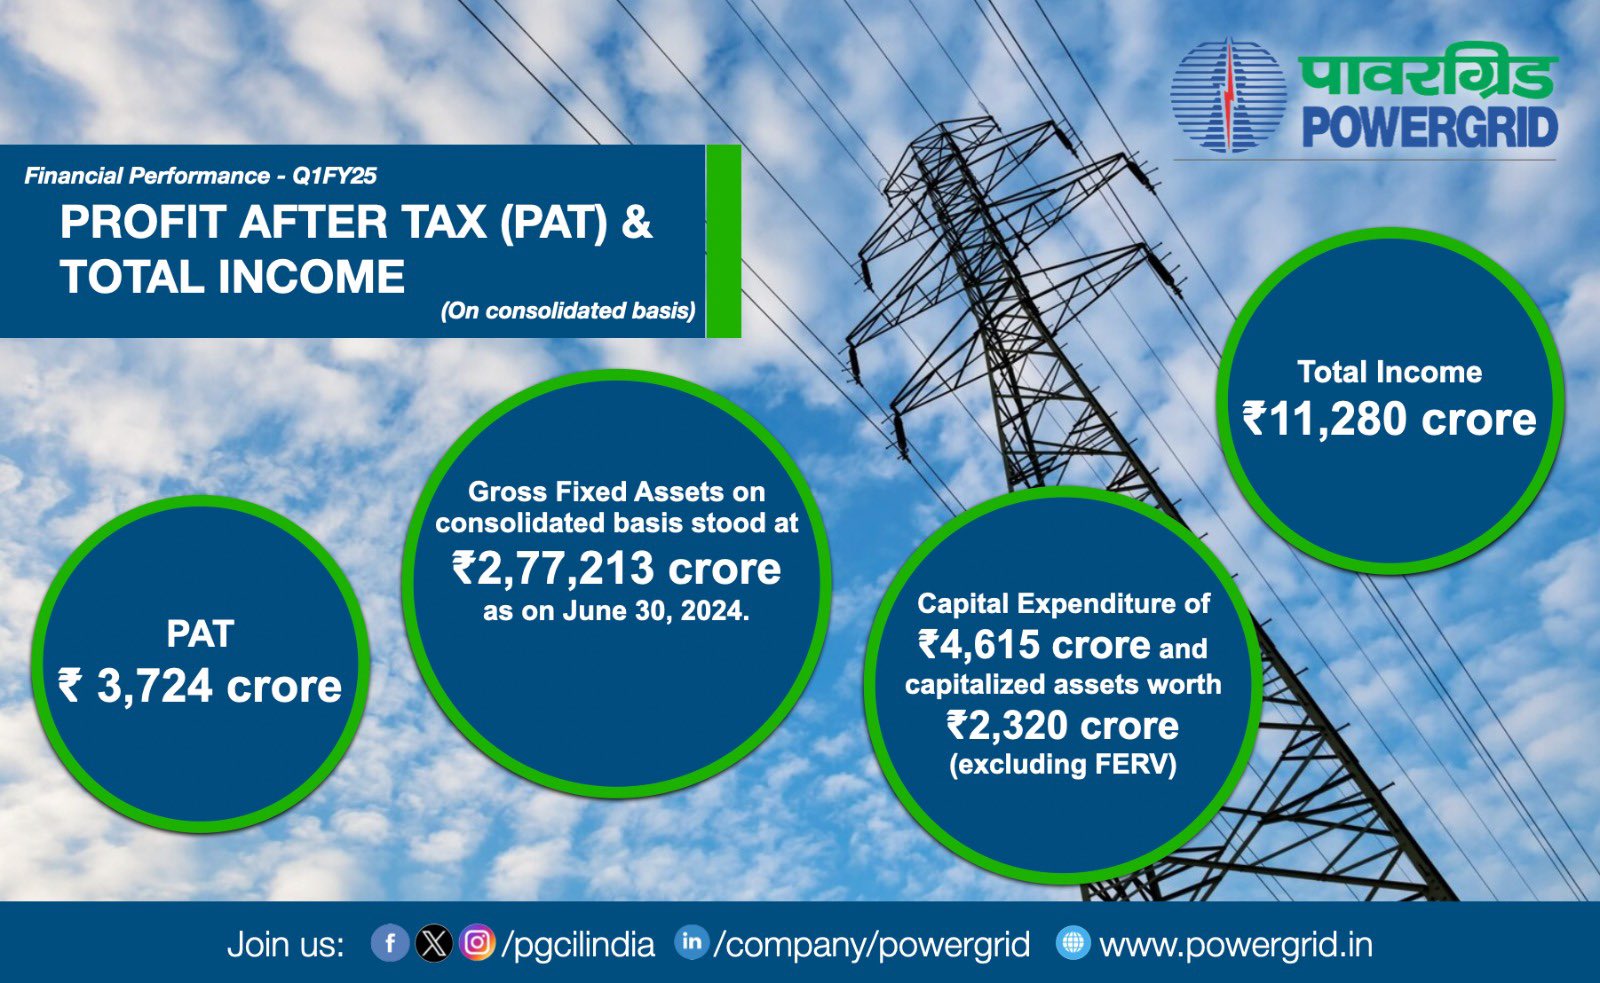 Project-Your-State--powergrid-posts-profit-after-tax-pat-of--3724-crore-